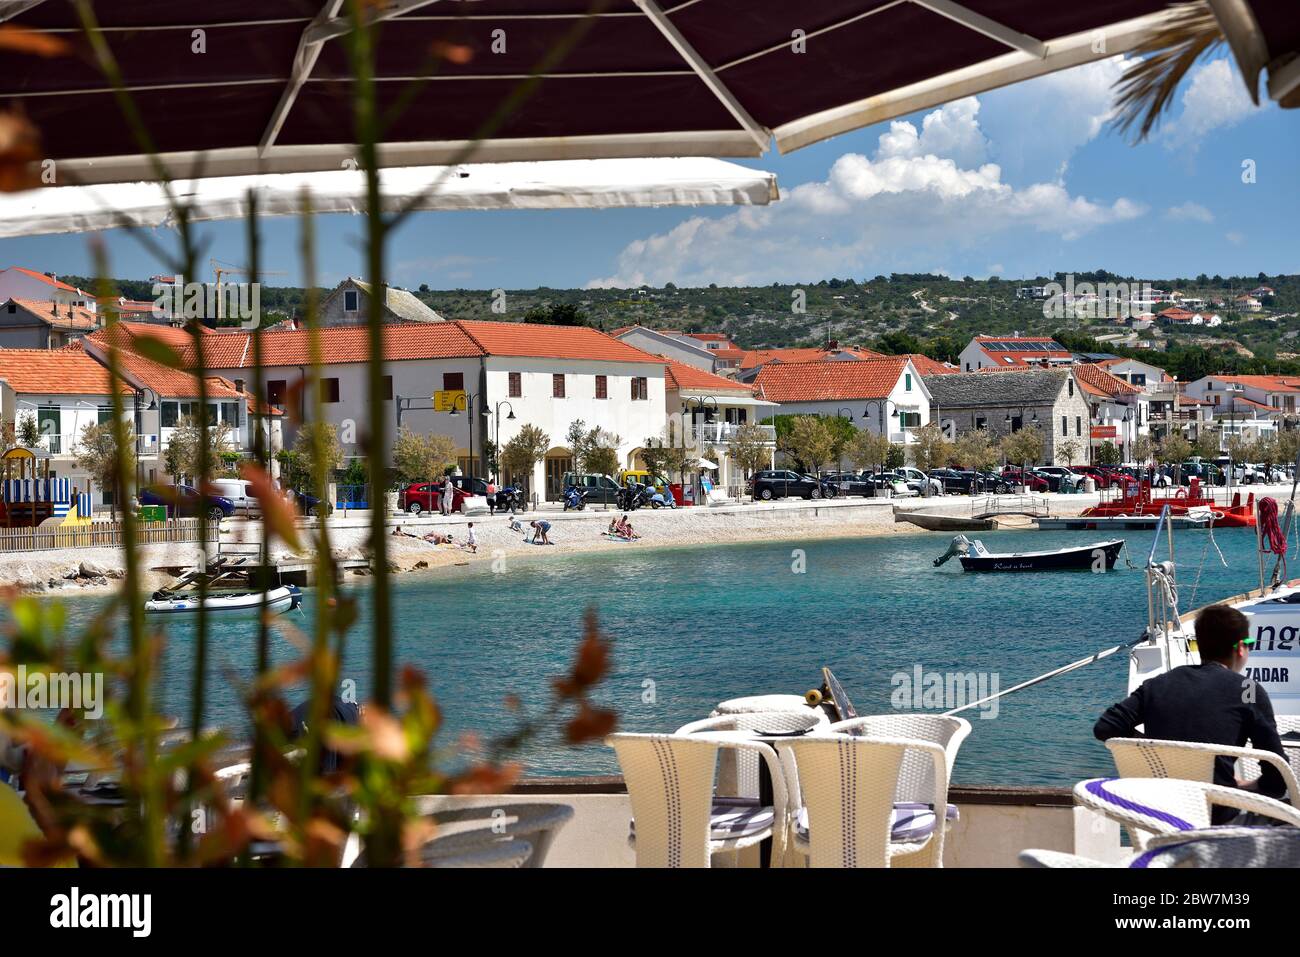 PRIMOSTEN, CROATIA - MAY 2, 2019 - People sitting in cafeteria located in The famous and beautiful Primosten town in Dalmatia - popular tourist destin Stock Photo